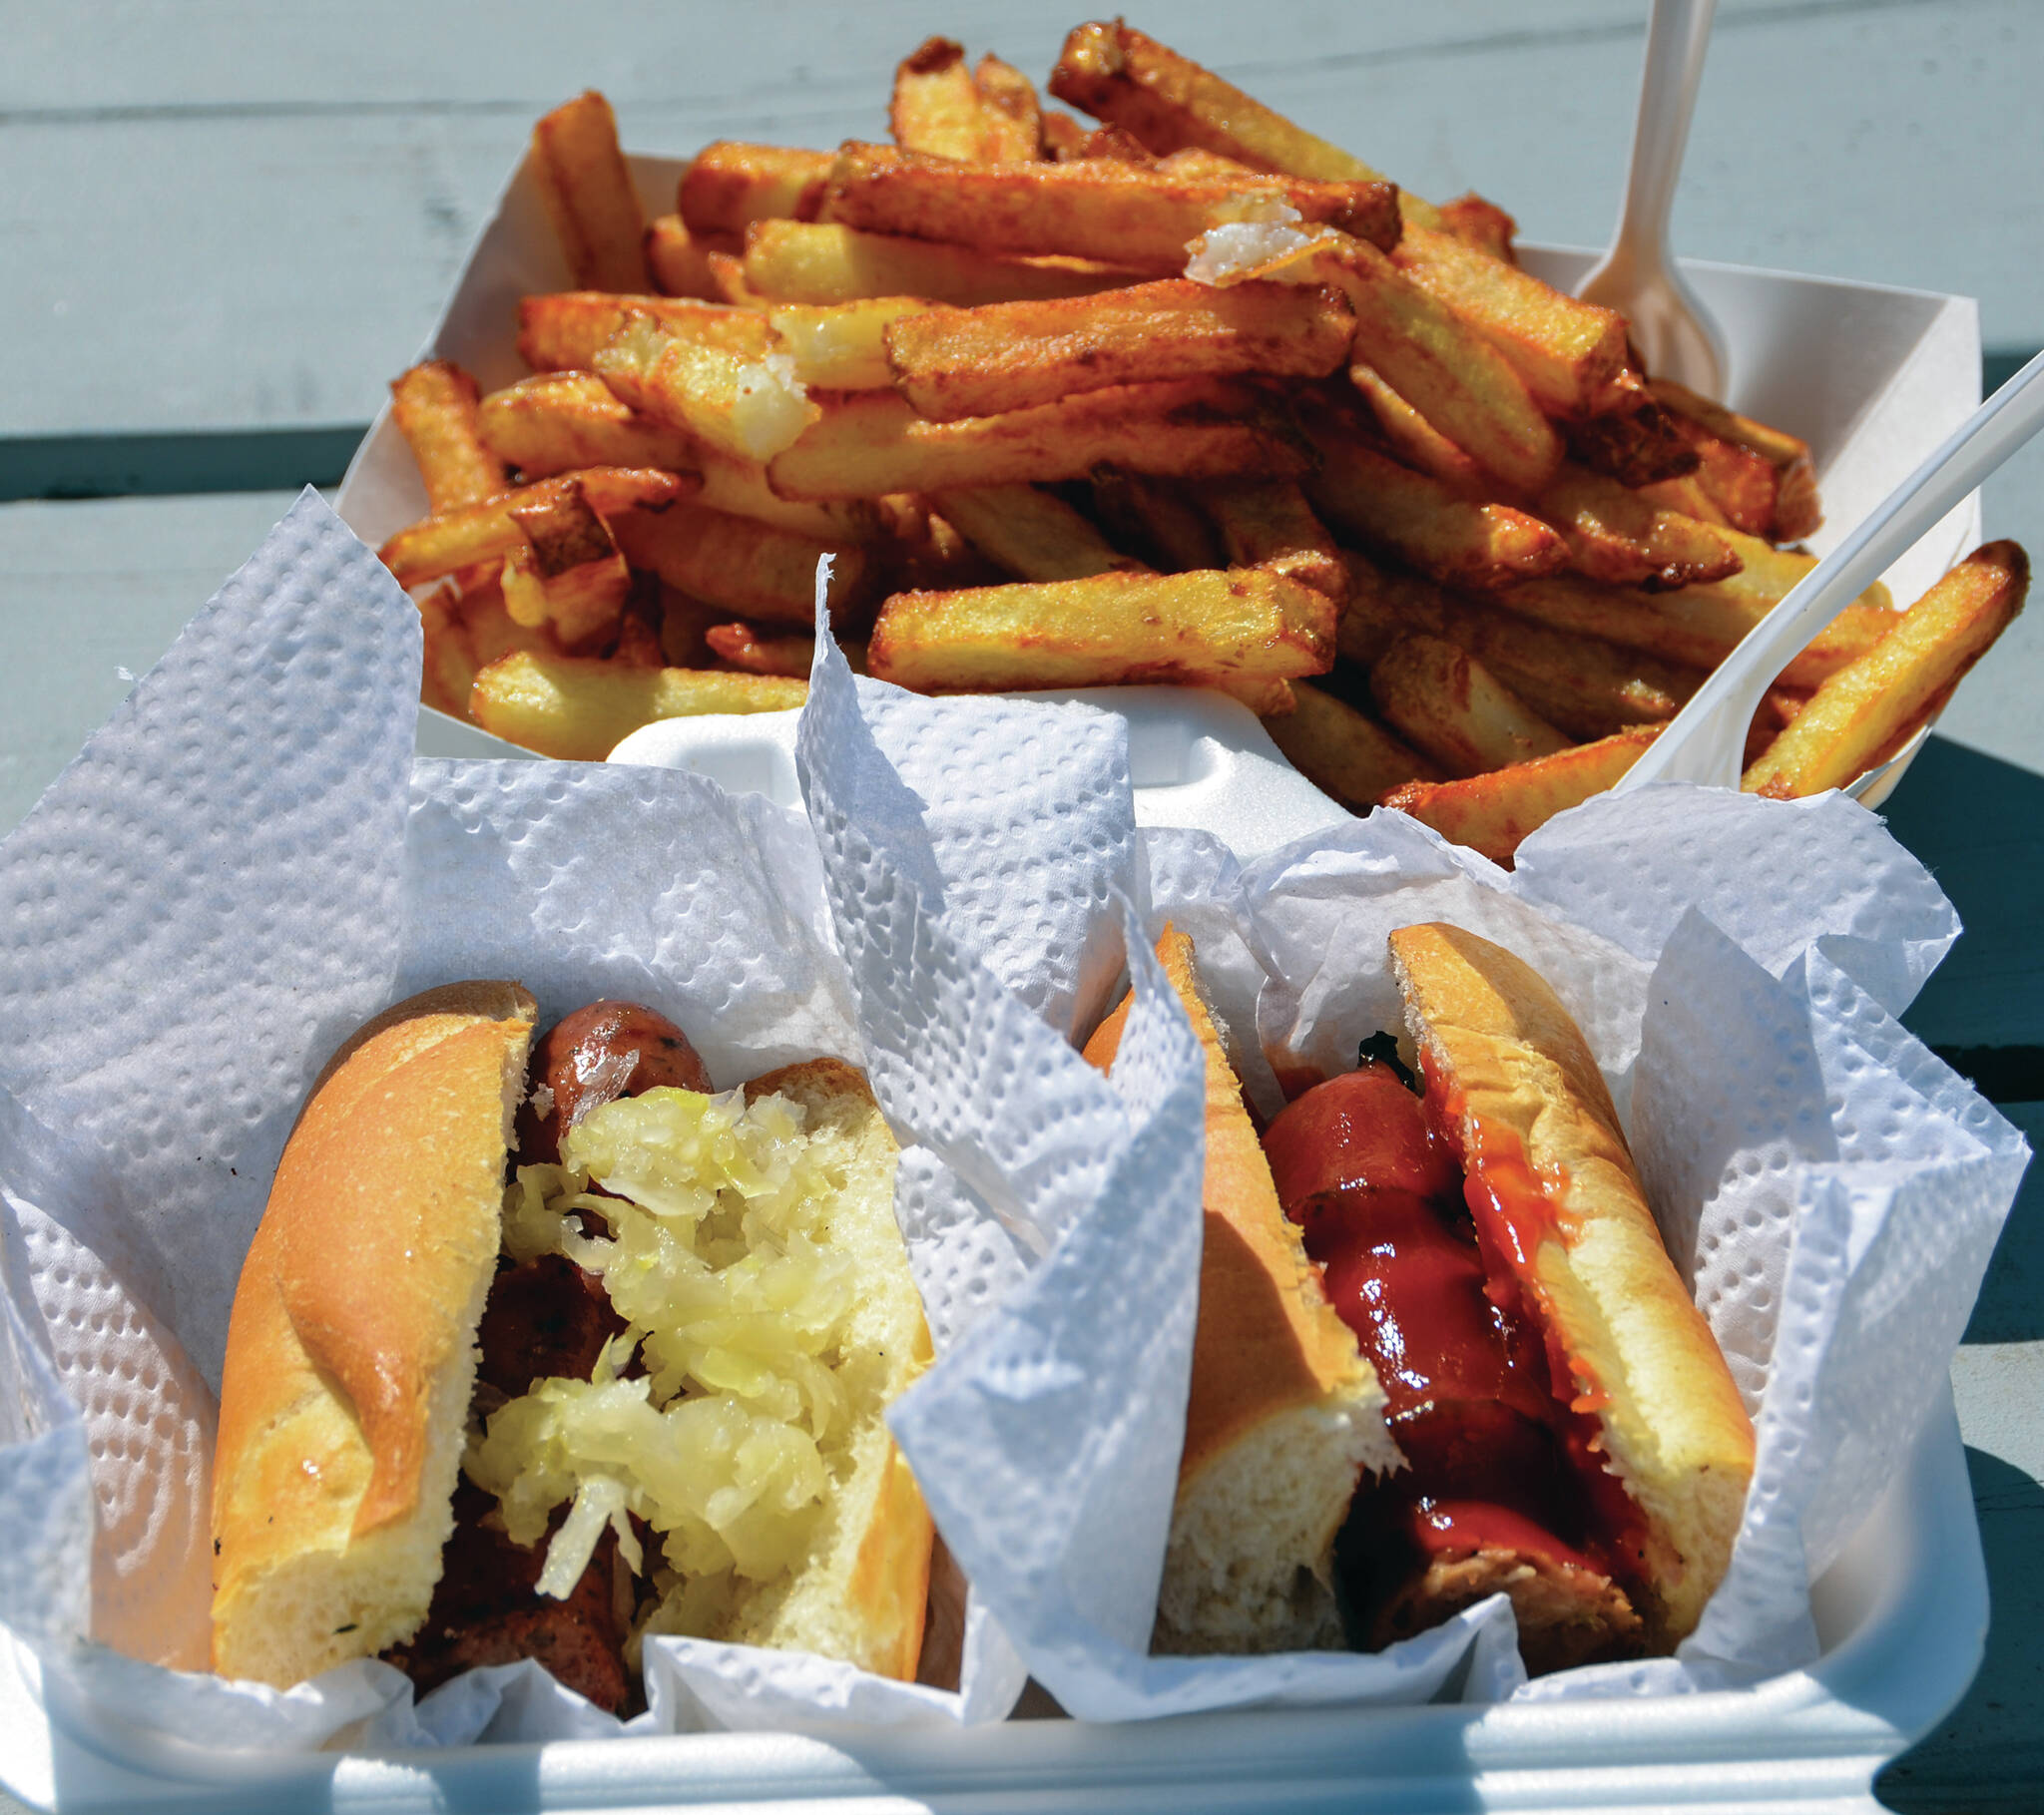 Left, a speciality Bulgarian sausage slavered in sauerkraut, right, a beef sausage with requisite ketchup, crowned by a generous serving of fries are among the many summertime food varieties. Ketchup, a popular condiment, has not always been made with tomatoes.. (Black Press file photo)